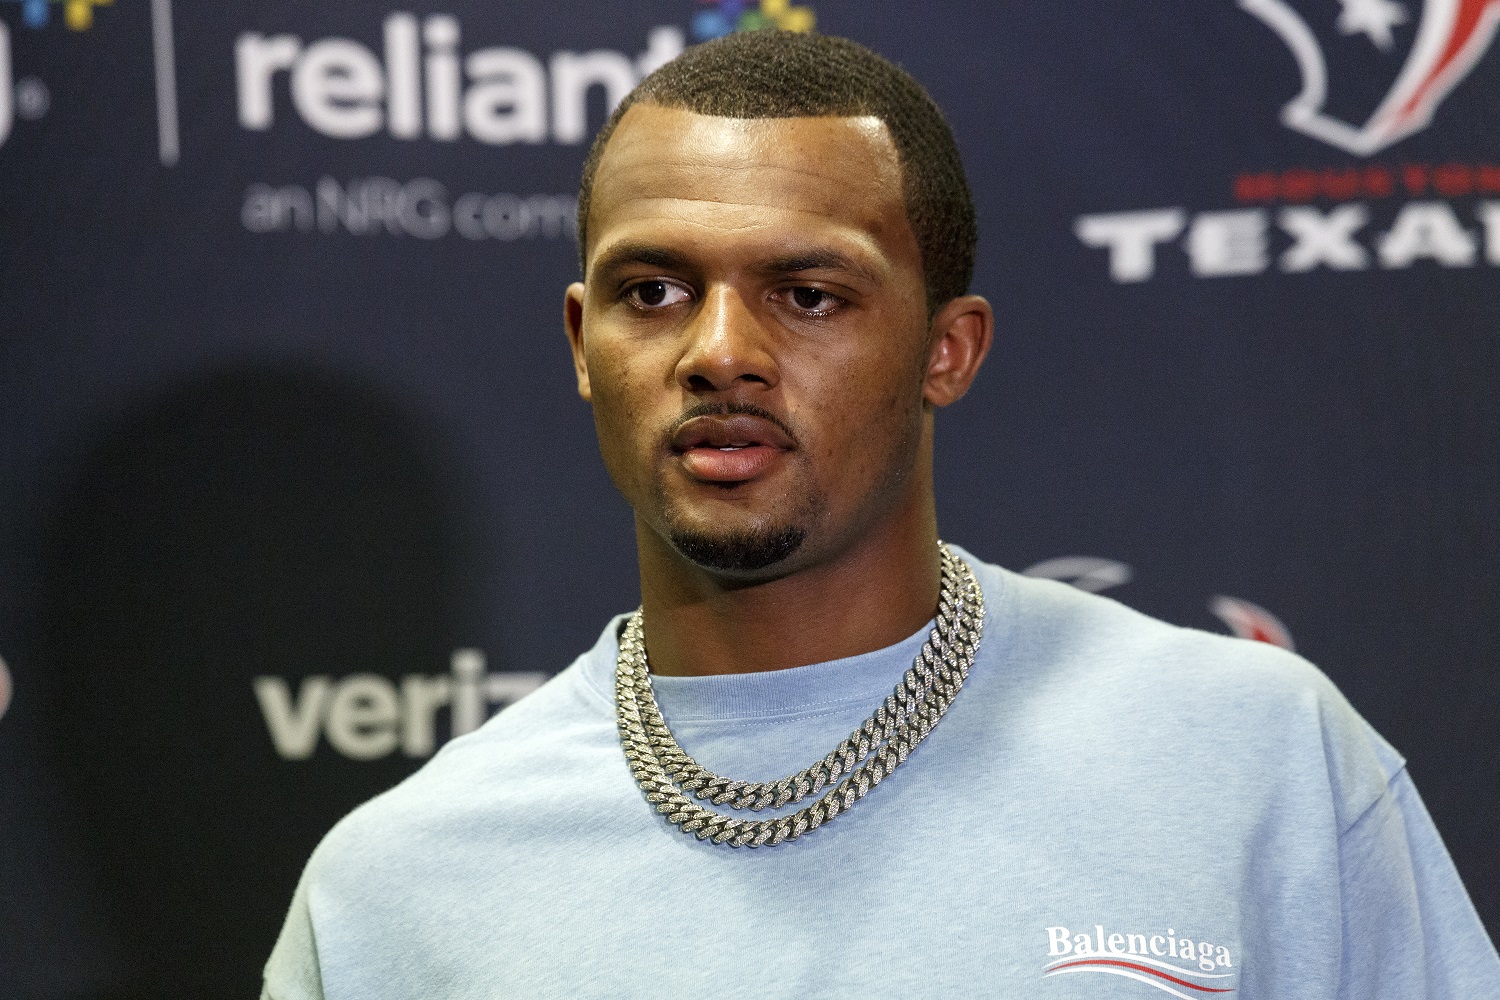 The Houston Texans Have Issued an Important Update on Deshaun Watson